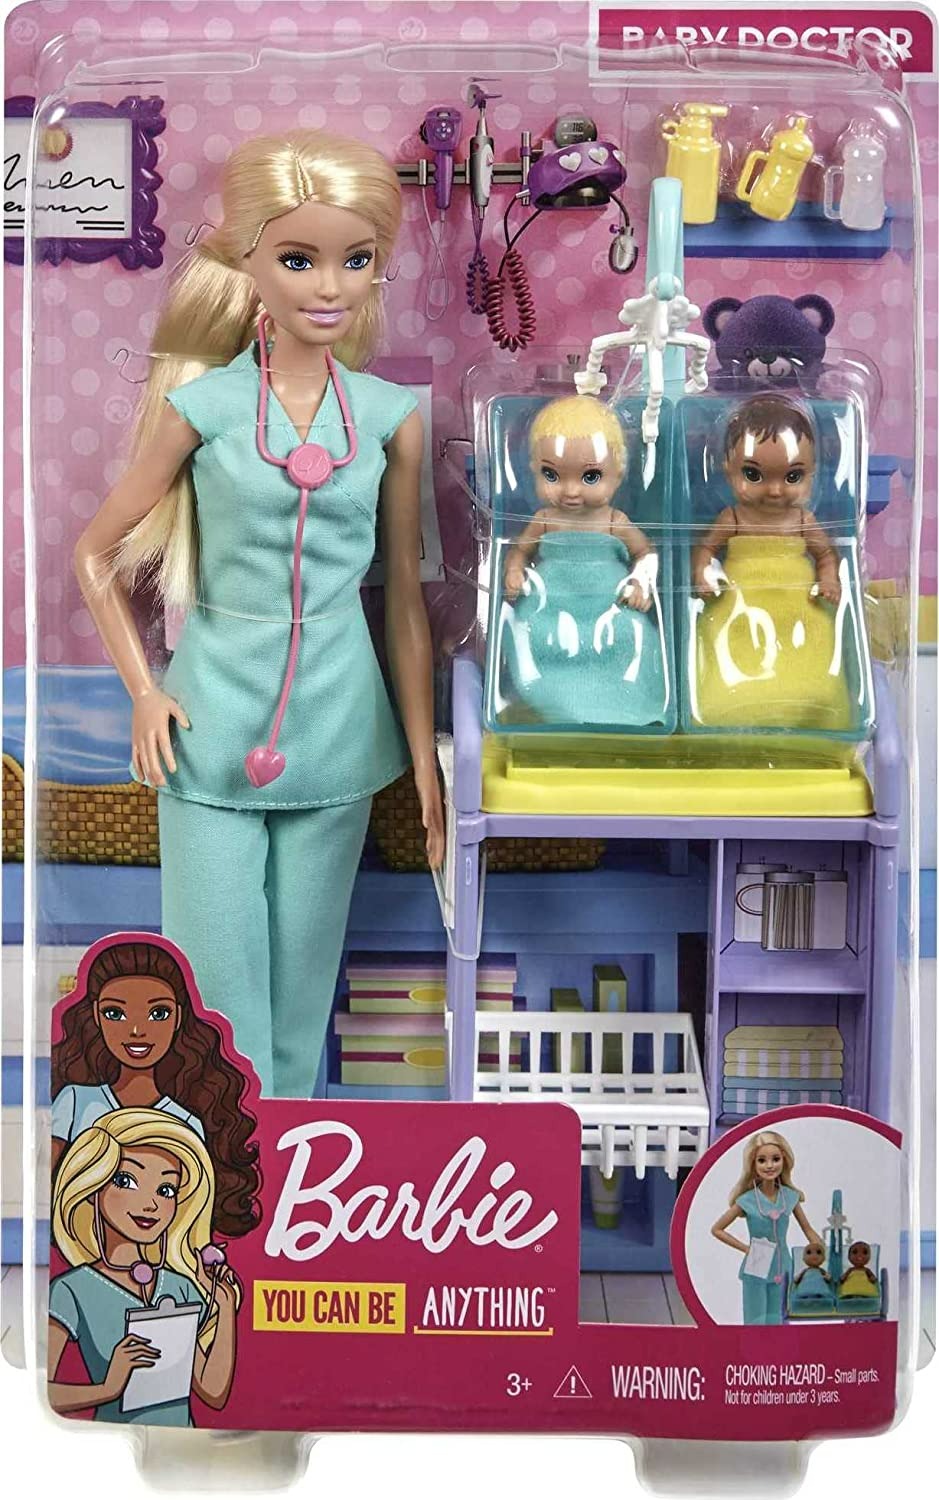 Barbie Careers Doll & Playset - Baby Doctor Theme with Blonde Fashion Doll-1